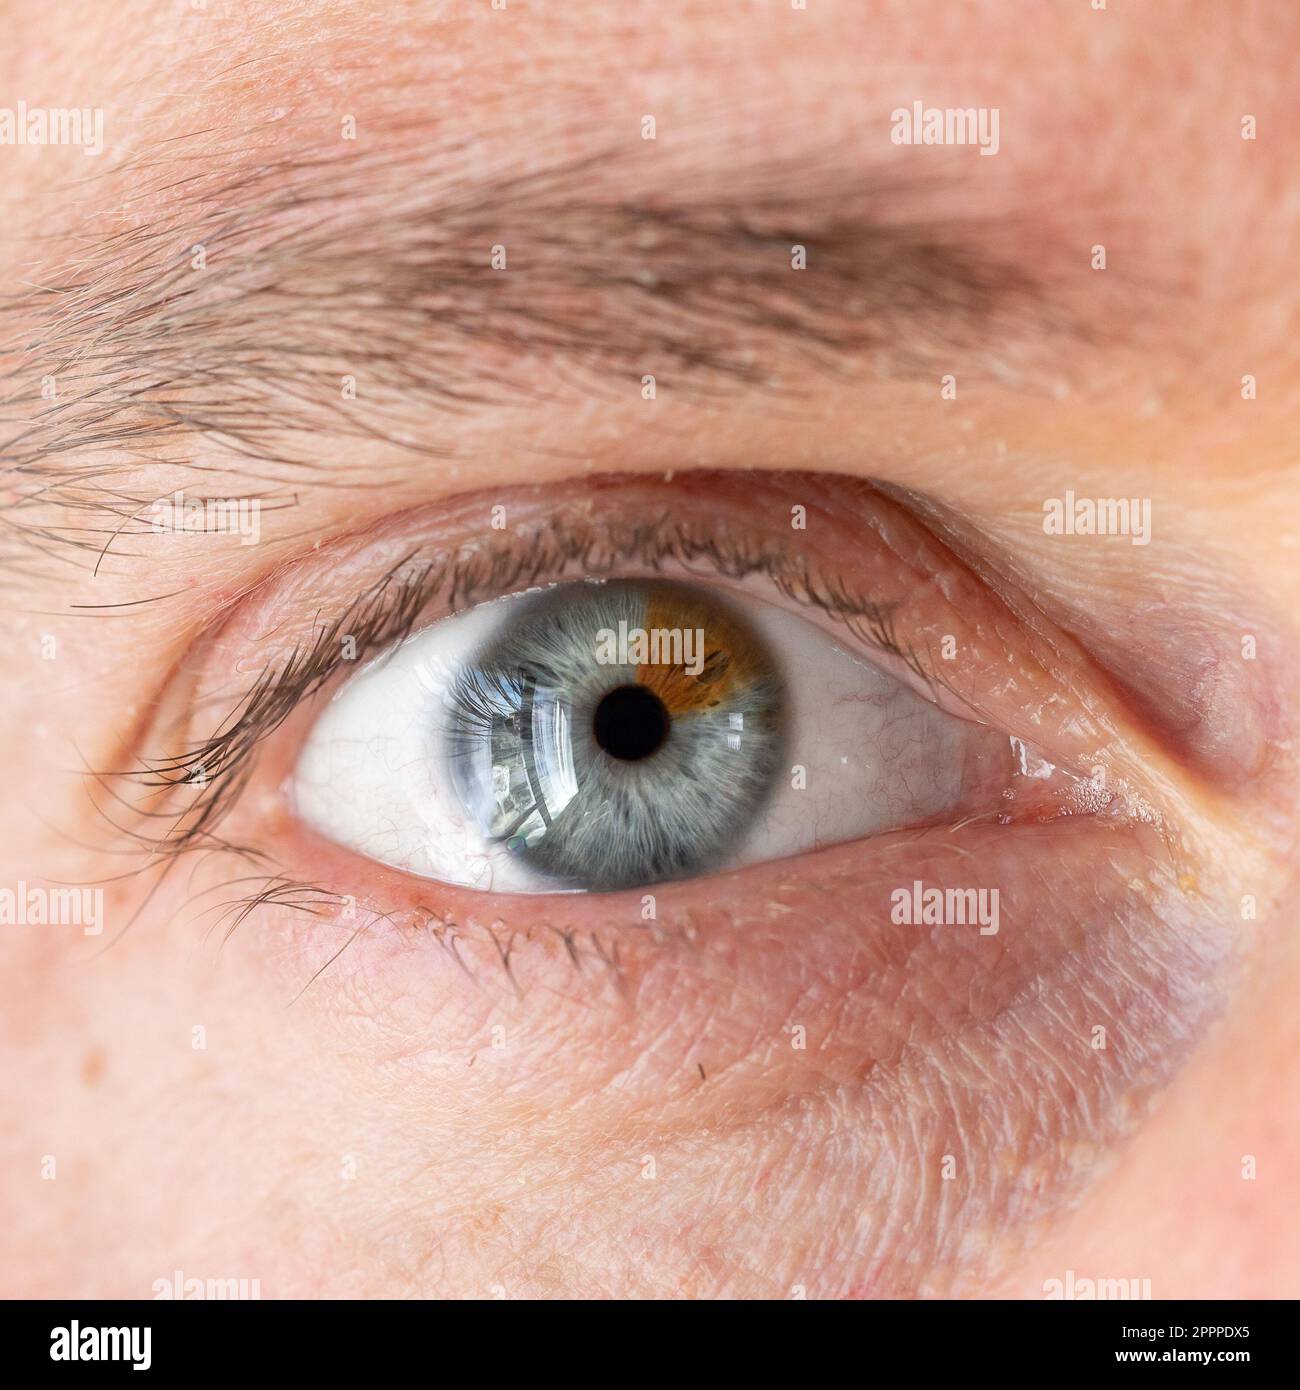 Man Blue Eye Images – Browse 174,600 Stock Photos, Vectors, and